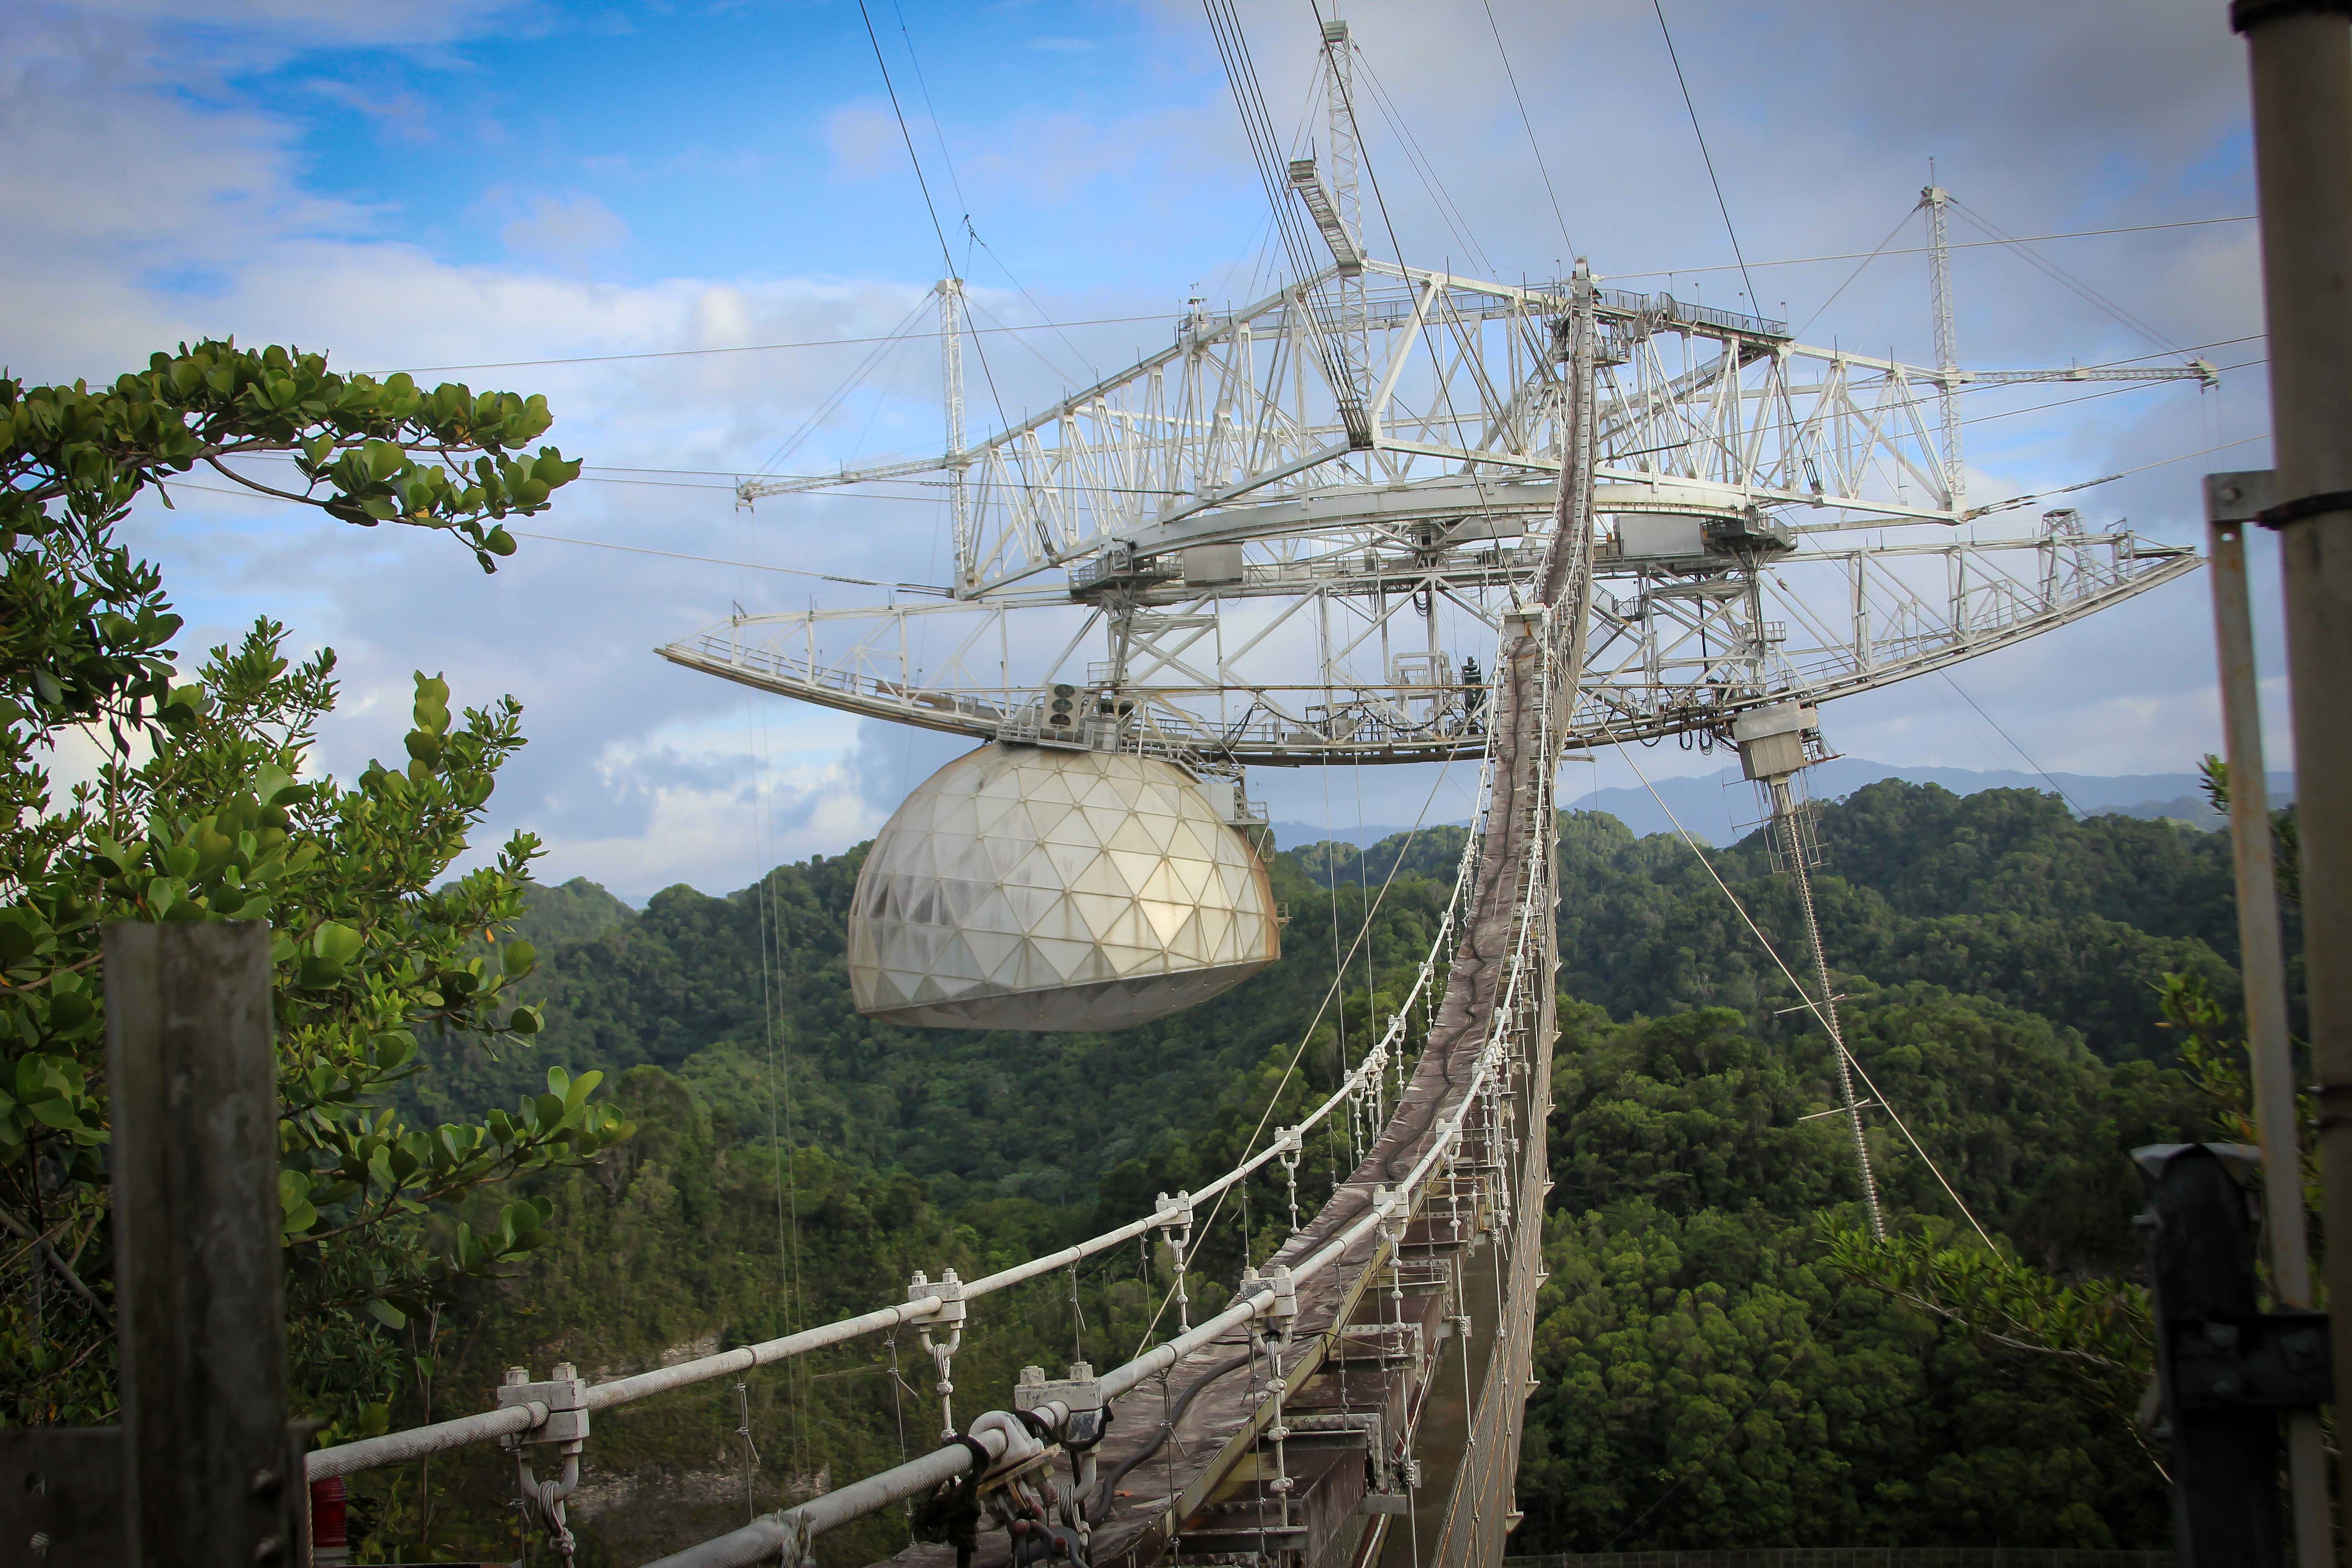 An image of Arecibo Observatory's iconic radio telescope before damage that began in August 2020; the curved azimuth arm and the dome suspended from it are both visible.